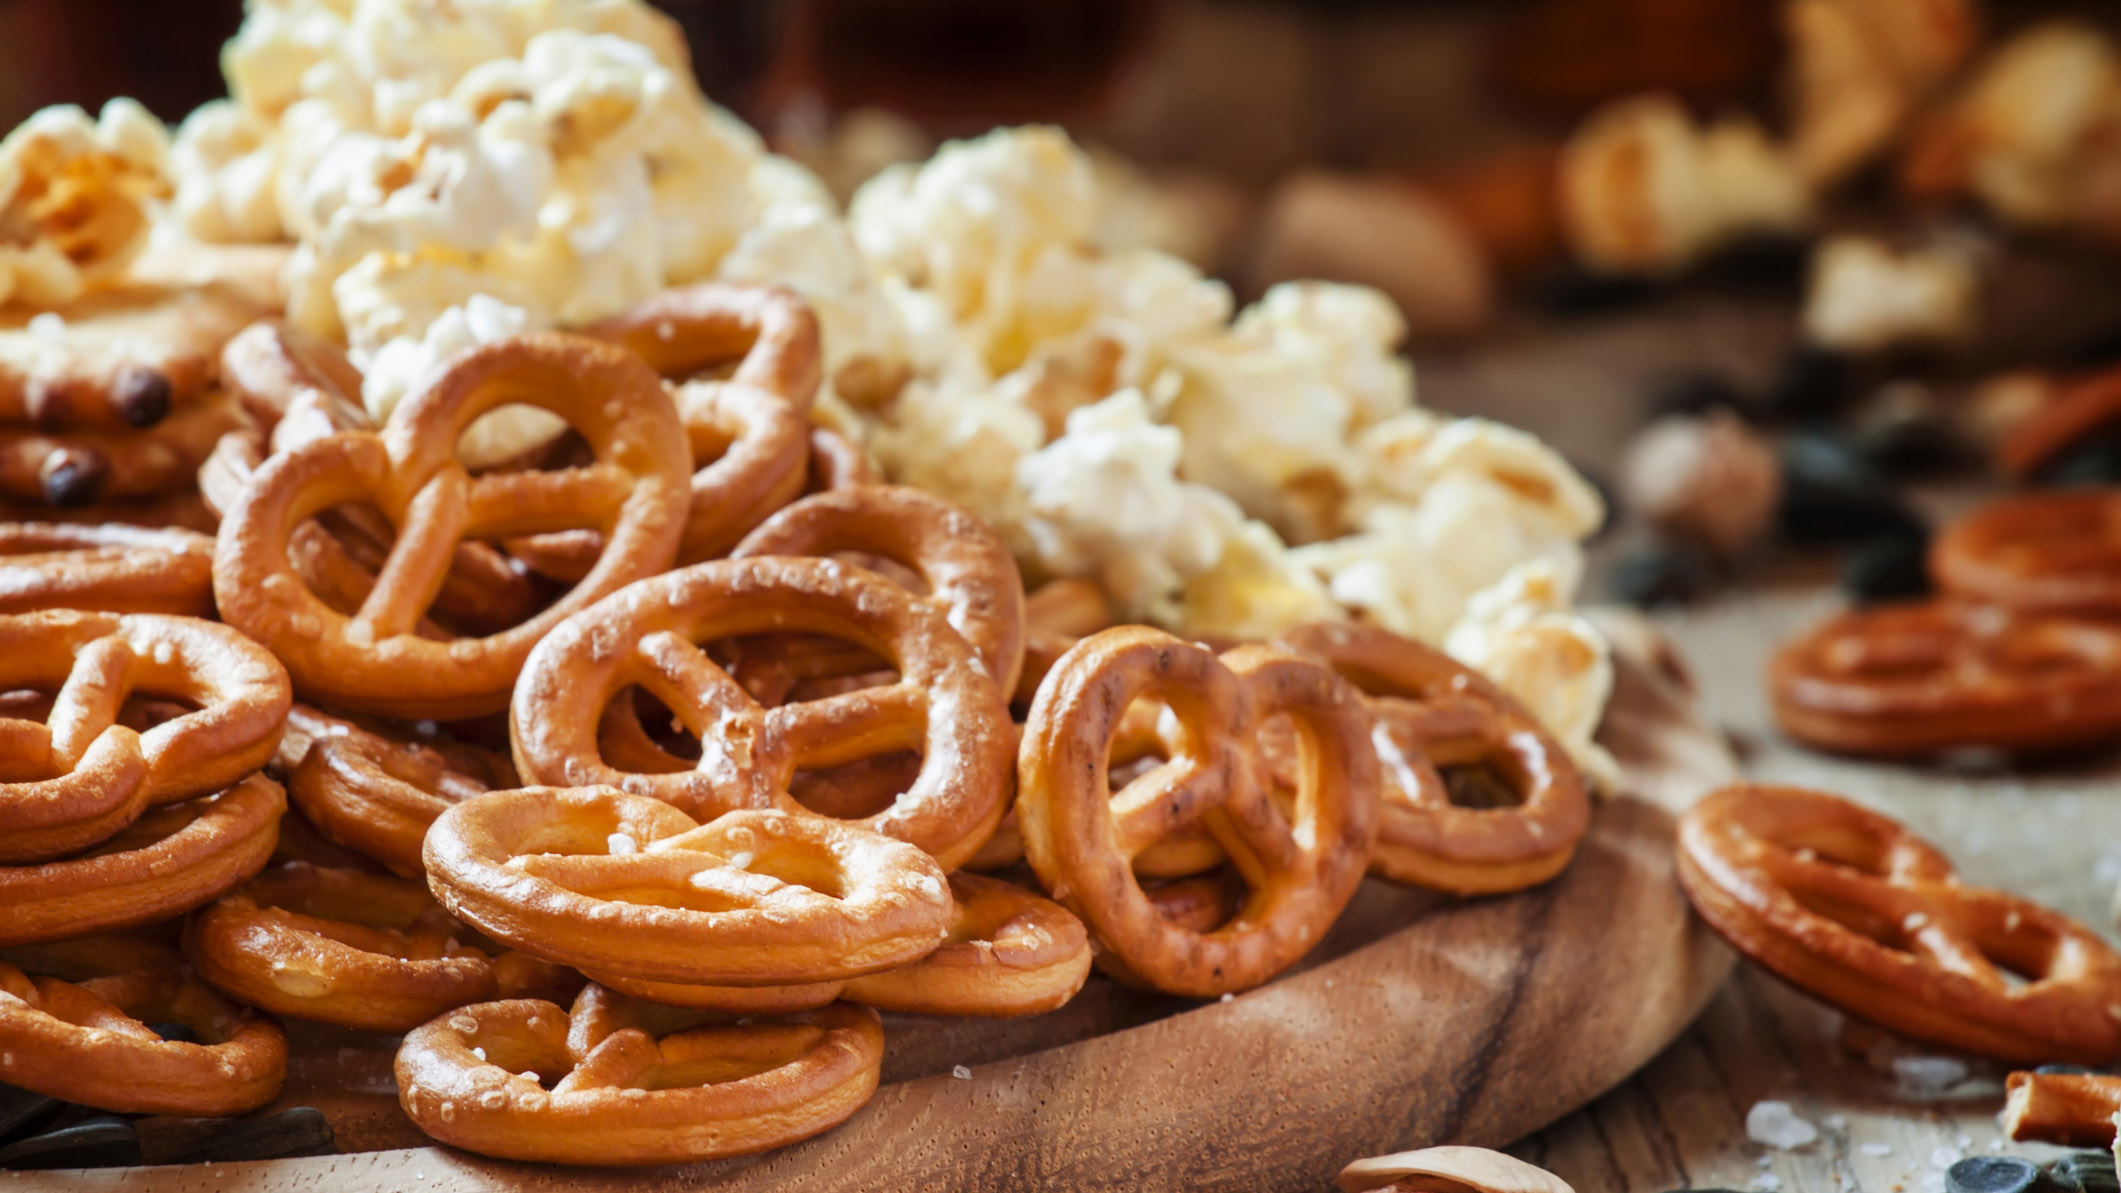 A wooden cutting board with pretzels and popcorn